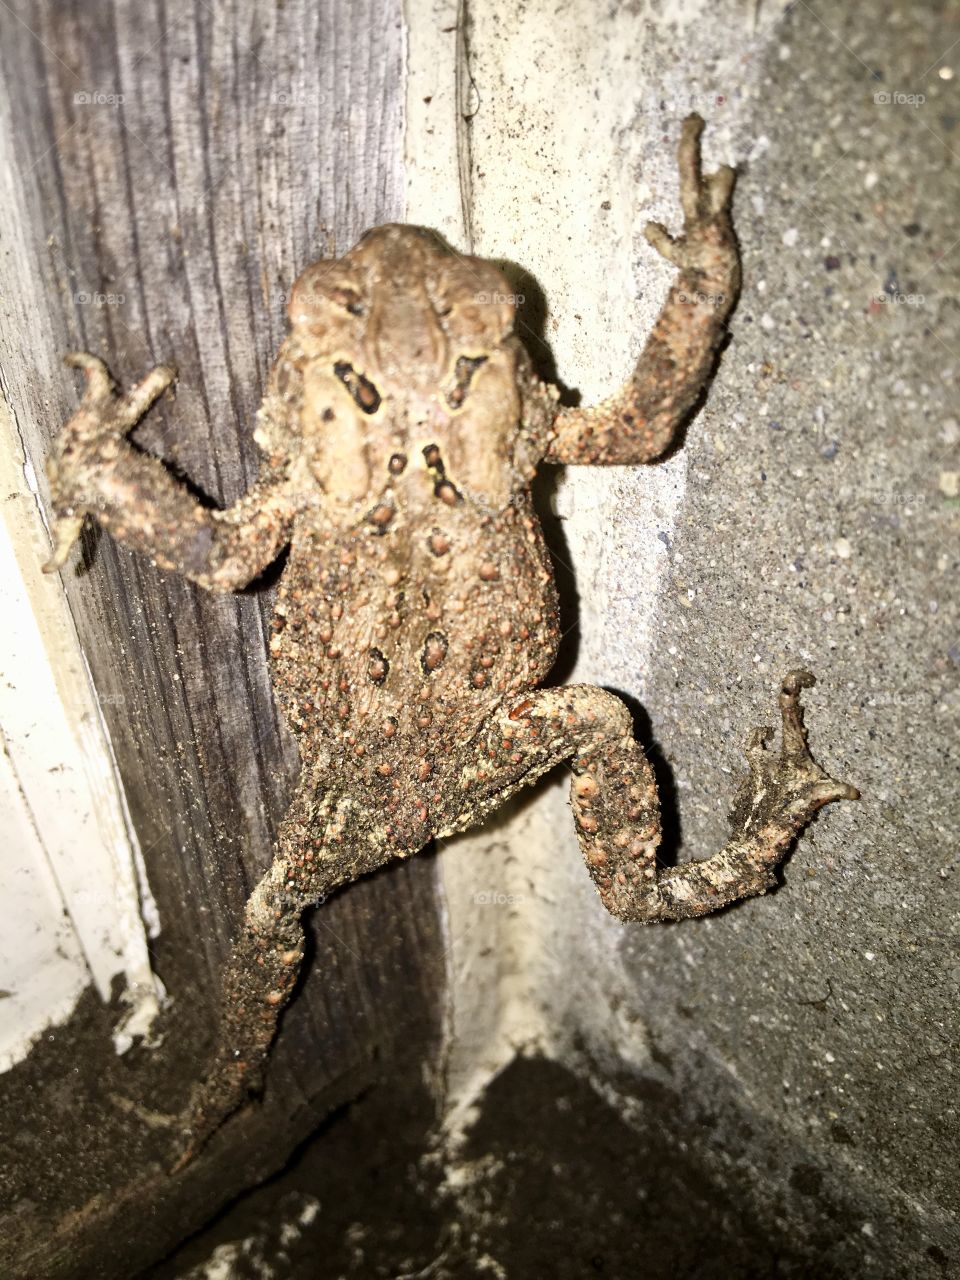 A toad climbing the corner of my window well. You can clearly see the texture of his skin and each of his limbs. Fairly big toad with nice patterns and dirt.